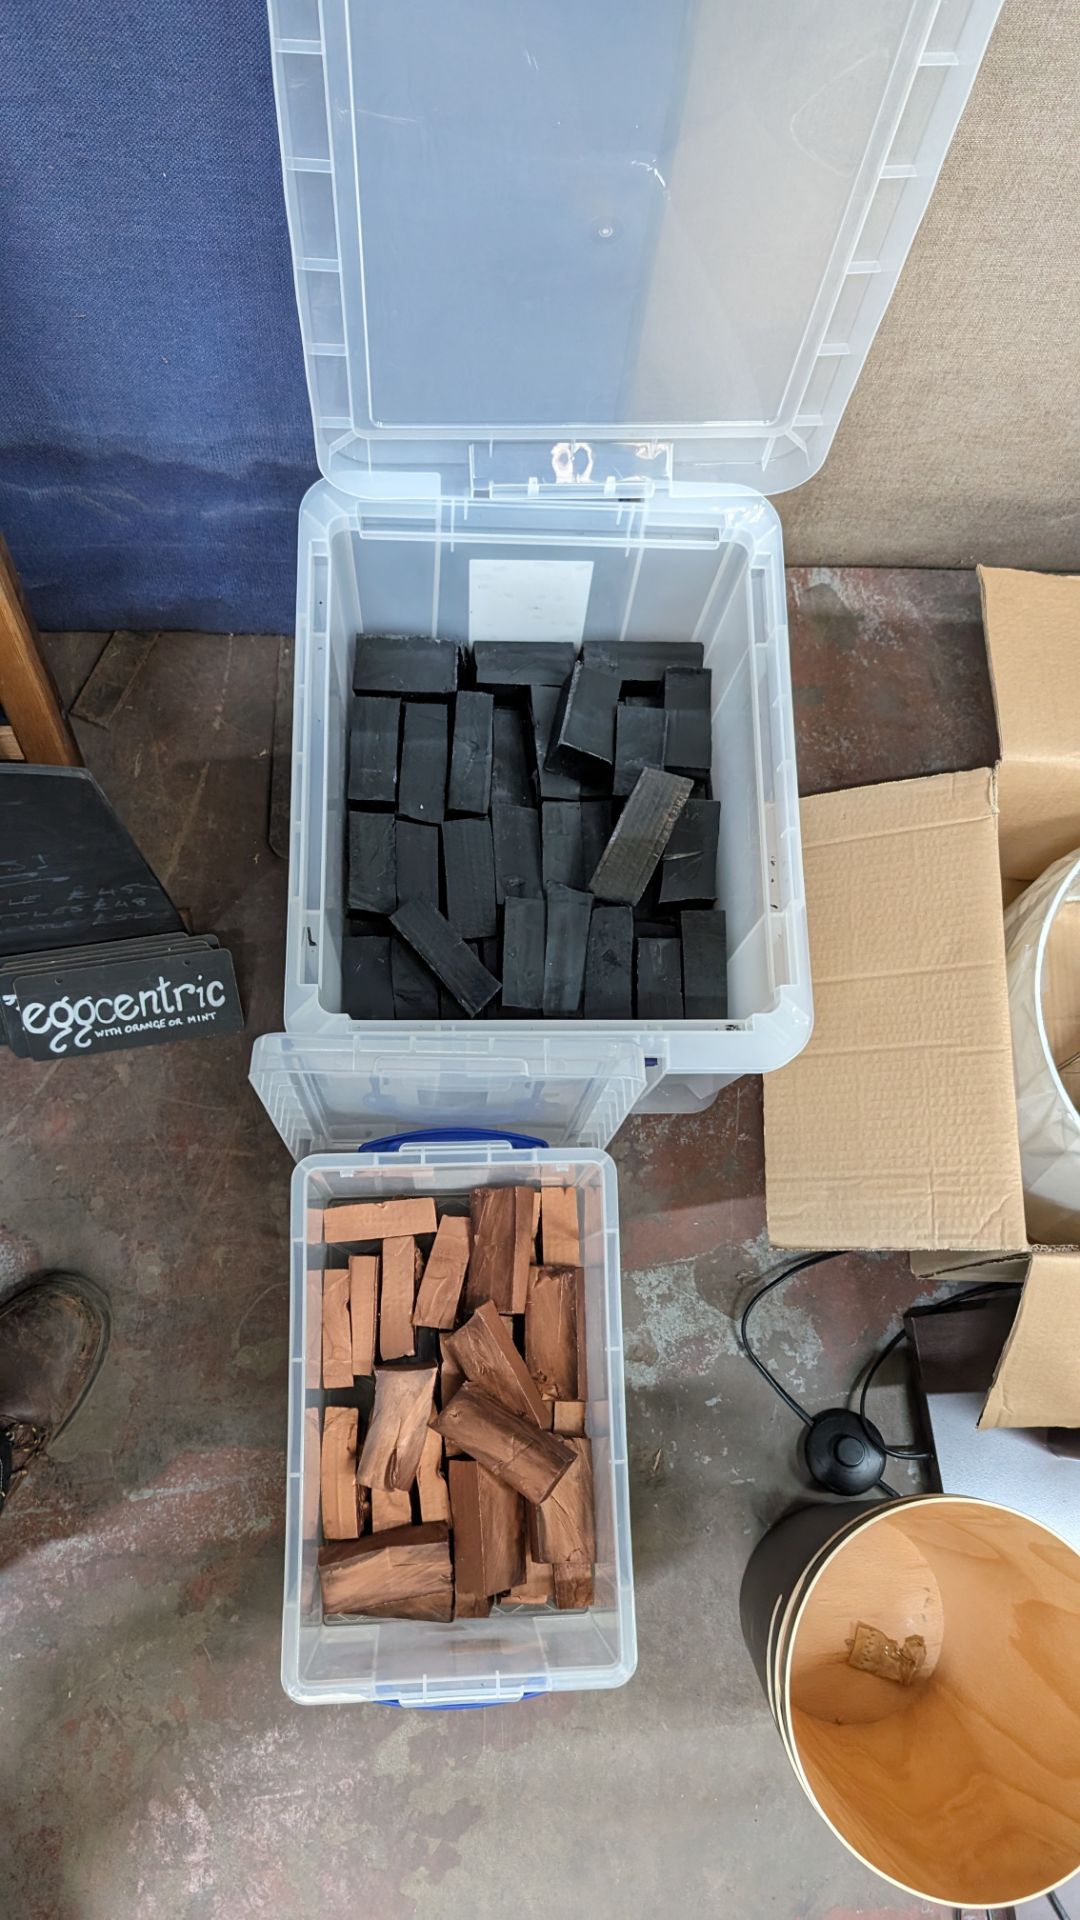 The contents of 2 crates of blocks of wax in black and gold